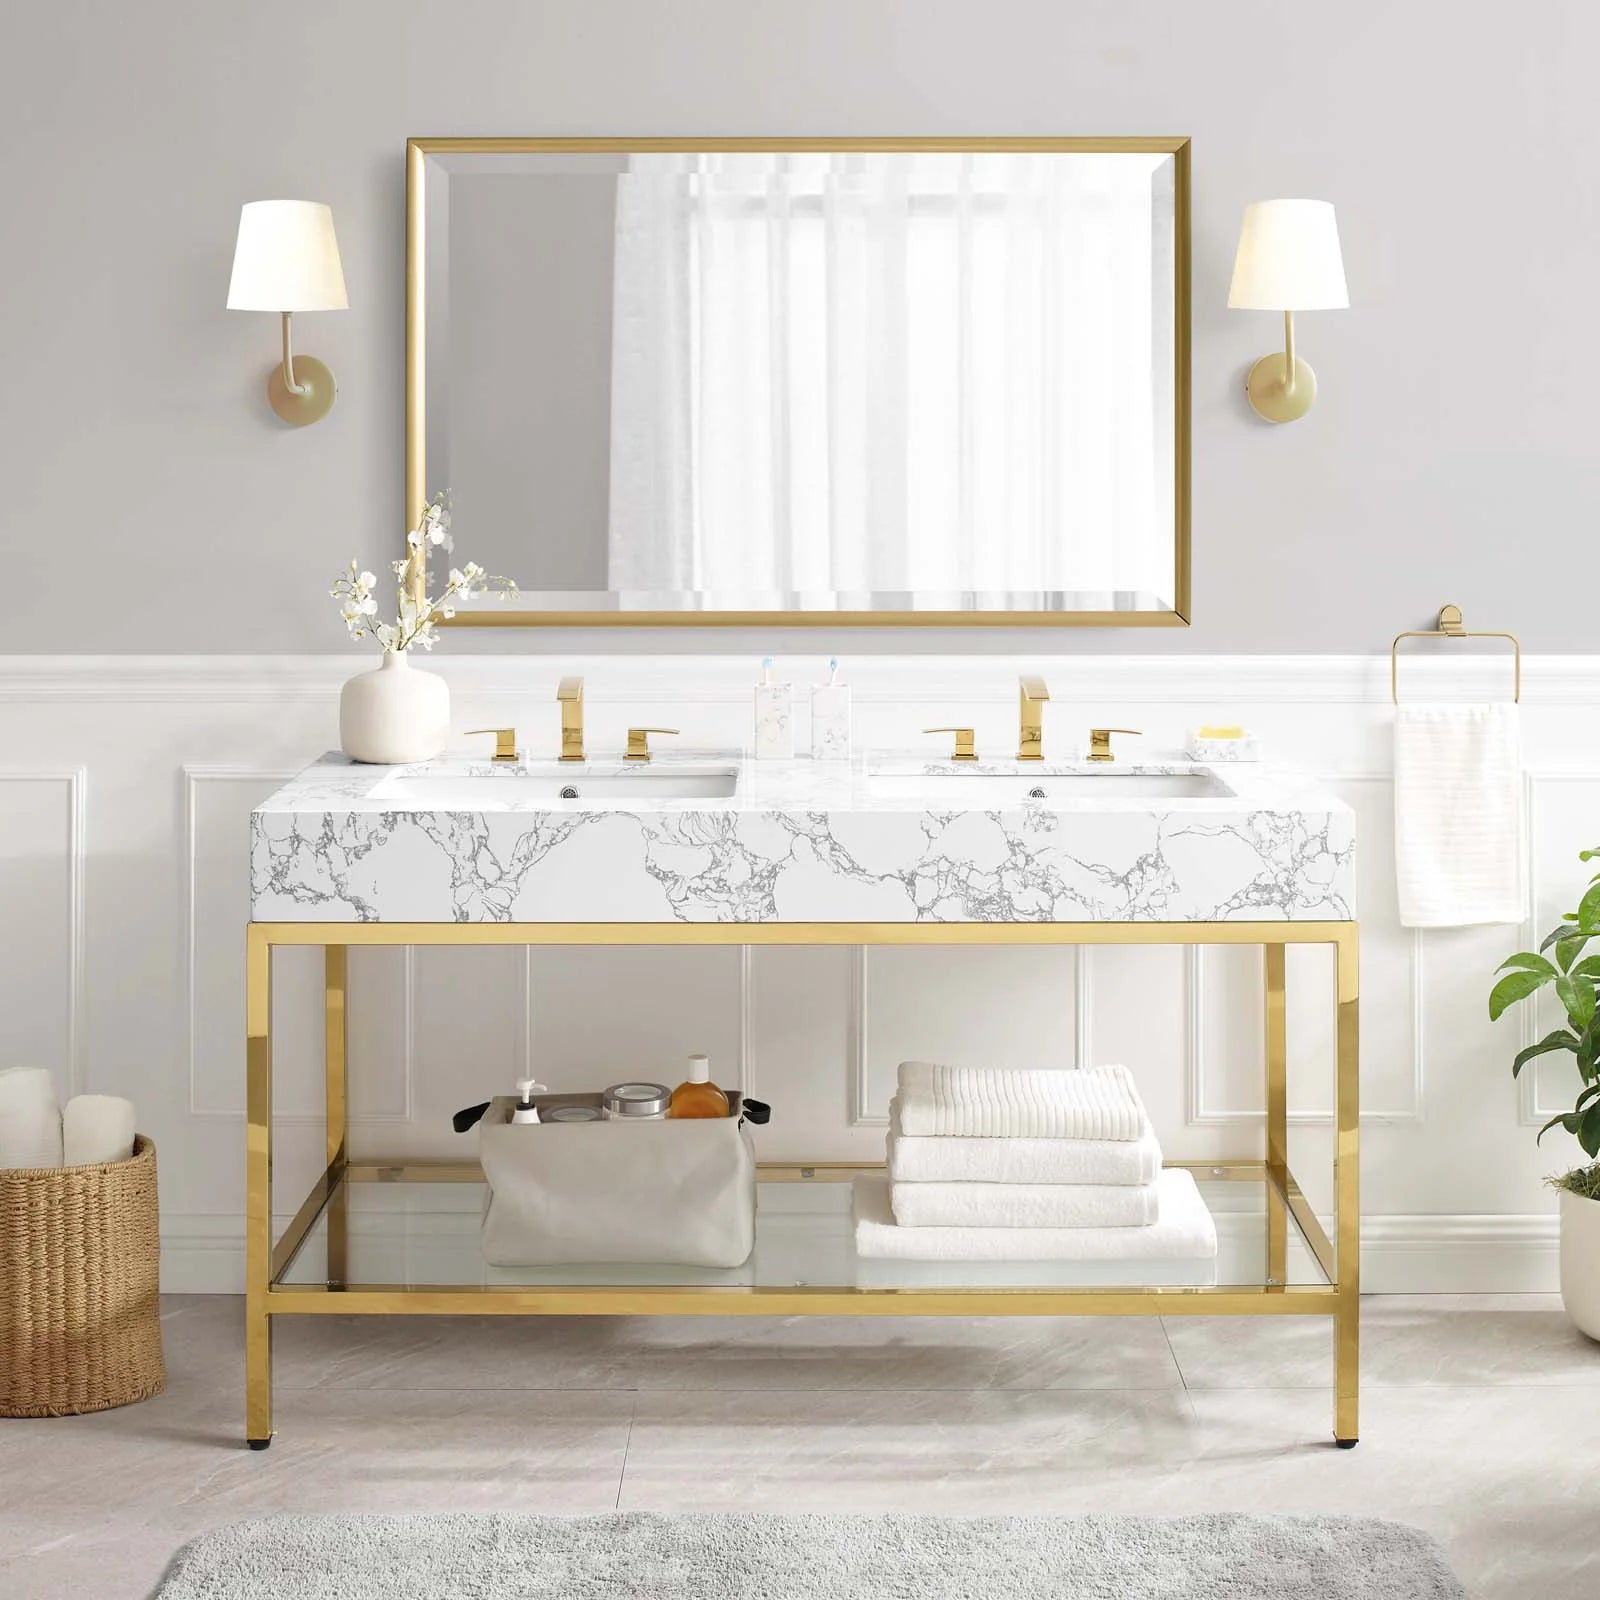 Transform Your Bathroom with Stylish and Convenient Ready-to-Assemble Bathroom Vanities